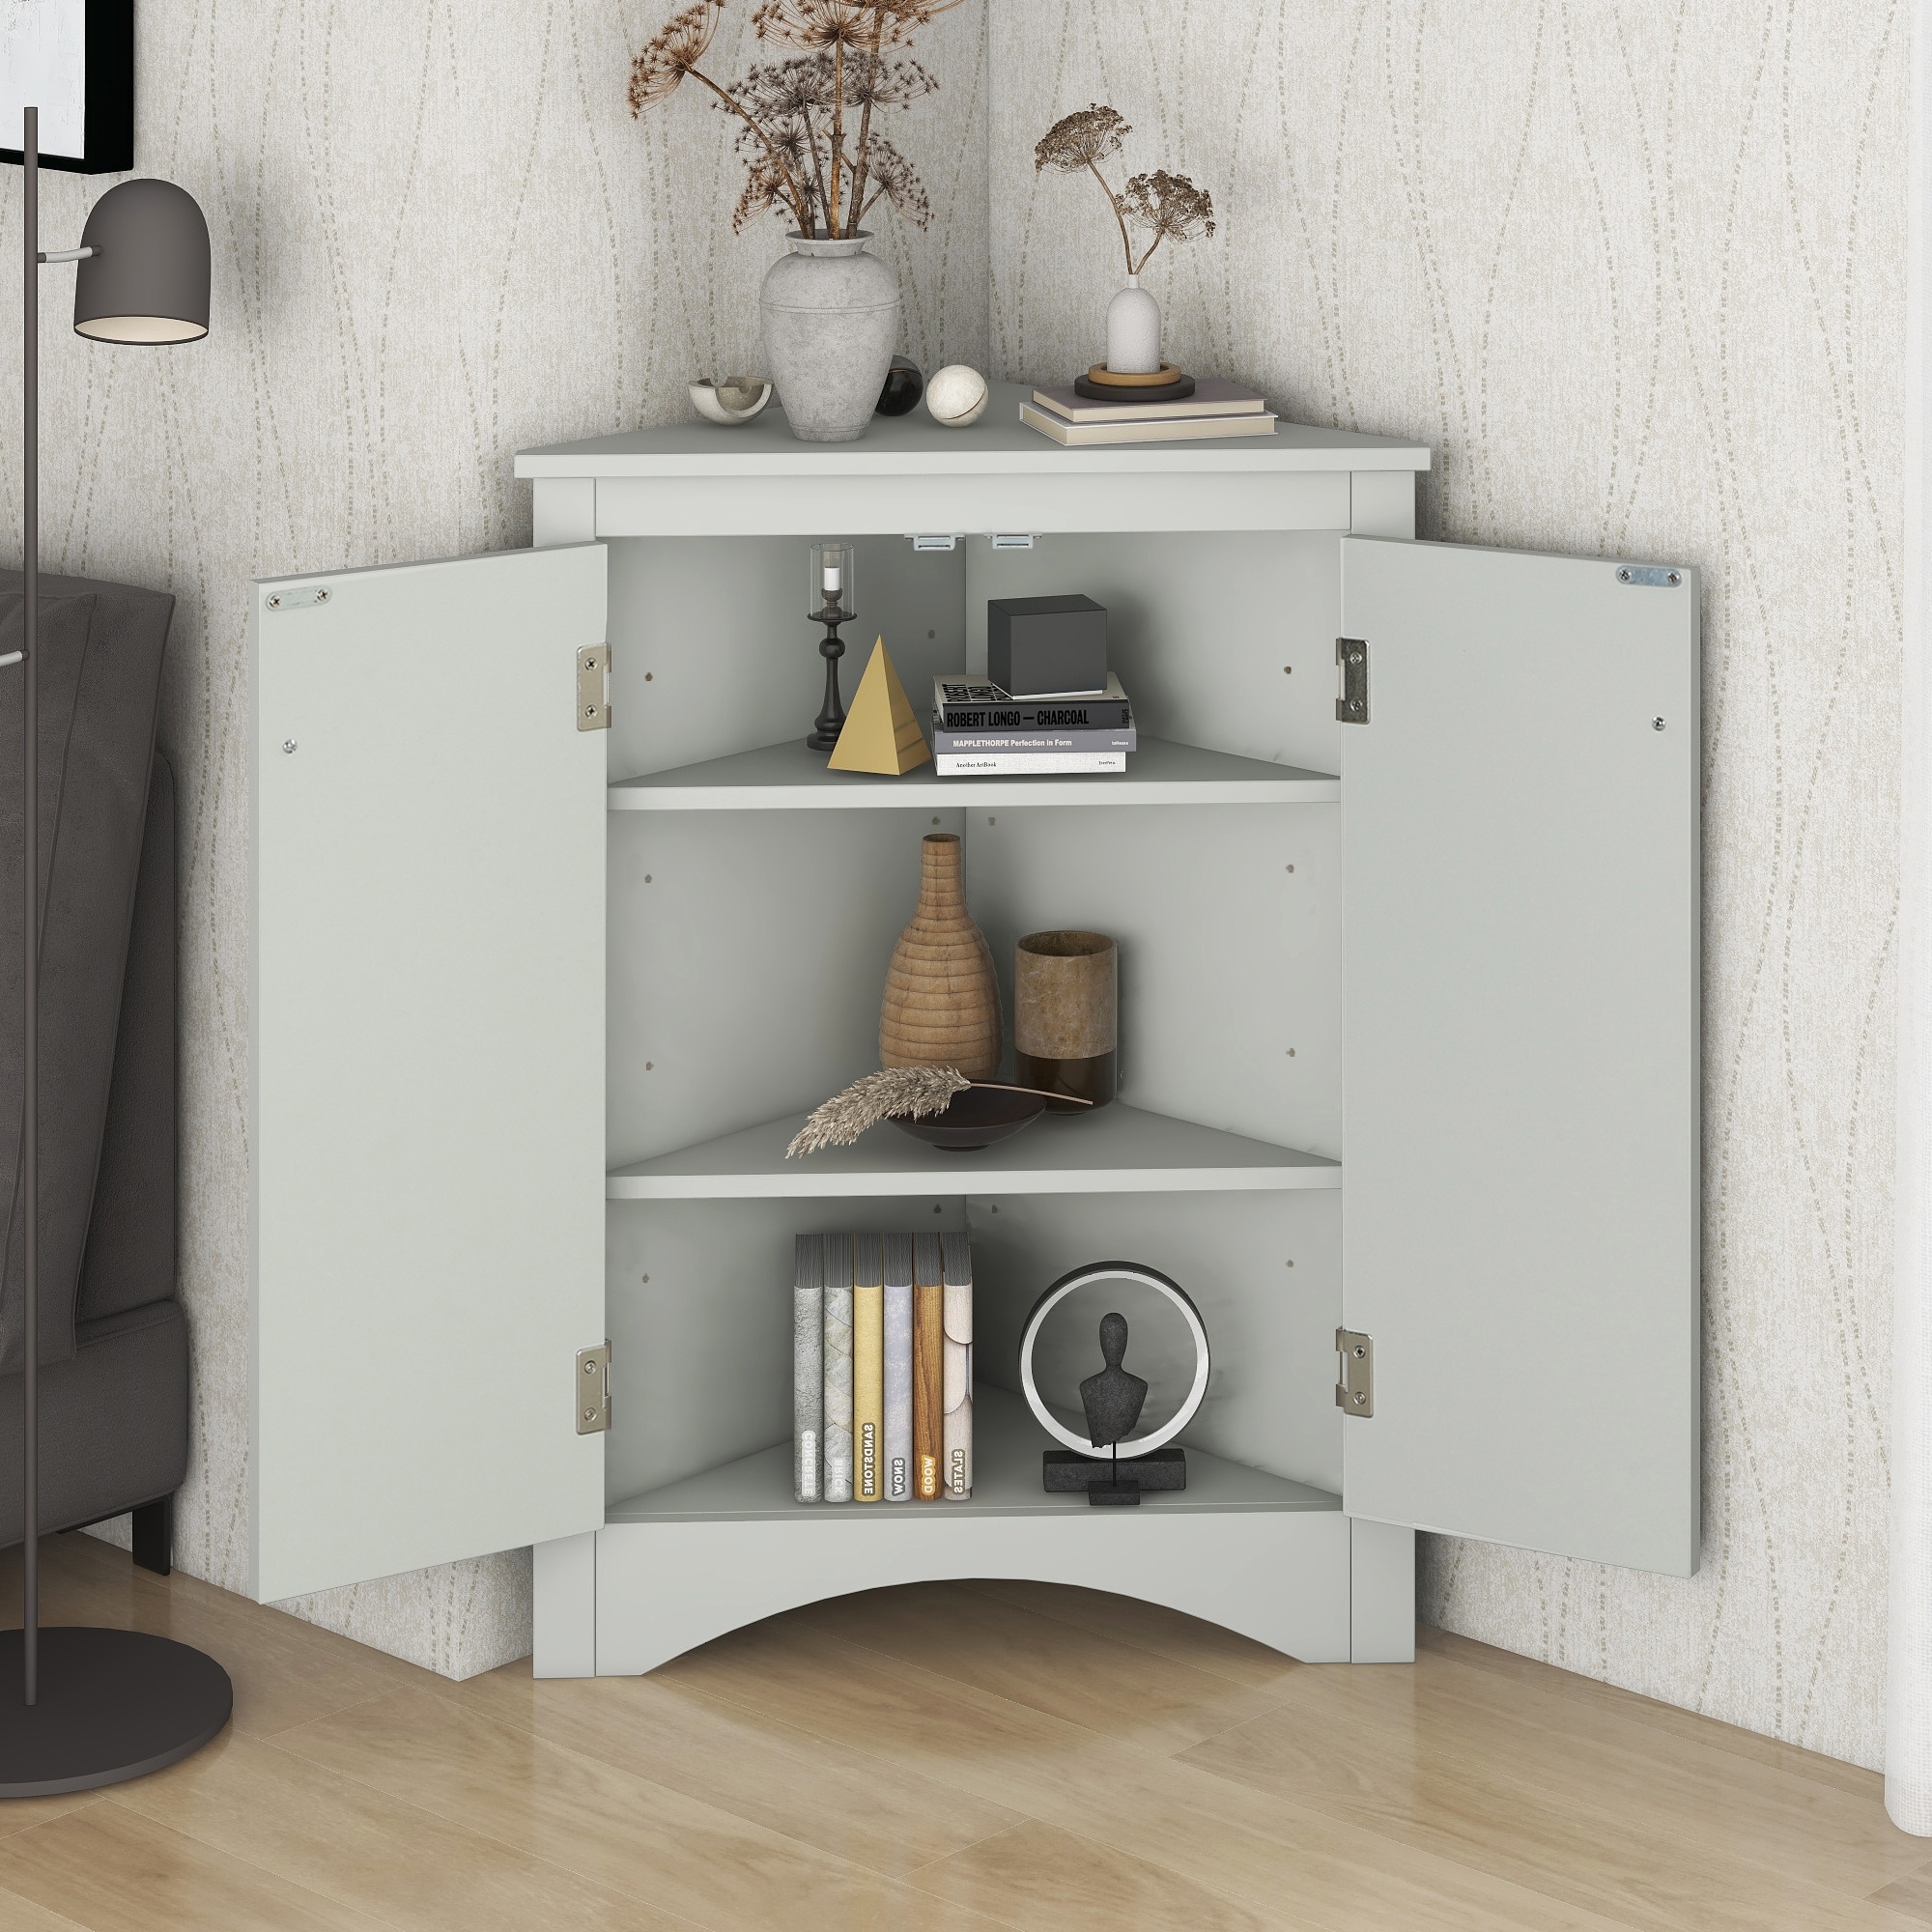 https://ak1.ostkcdn.com/images/products/is/images/direct/59916263276d3c8b36929eb4d334cf7cb771a350/Grey-Triangle-Bathroom-Storage-Cabinet-with-Adjustable-Shelves.jpg